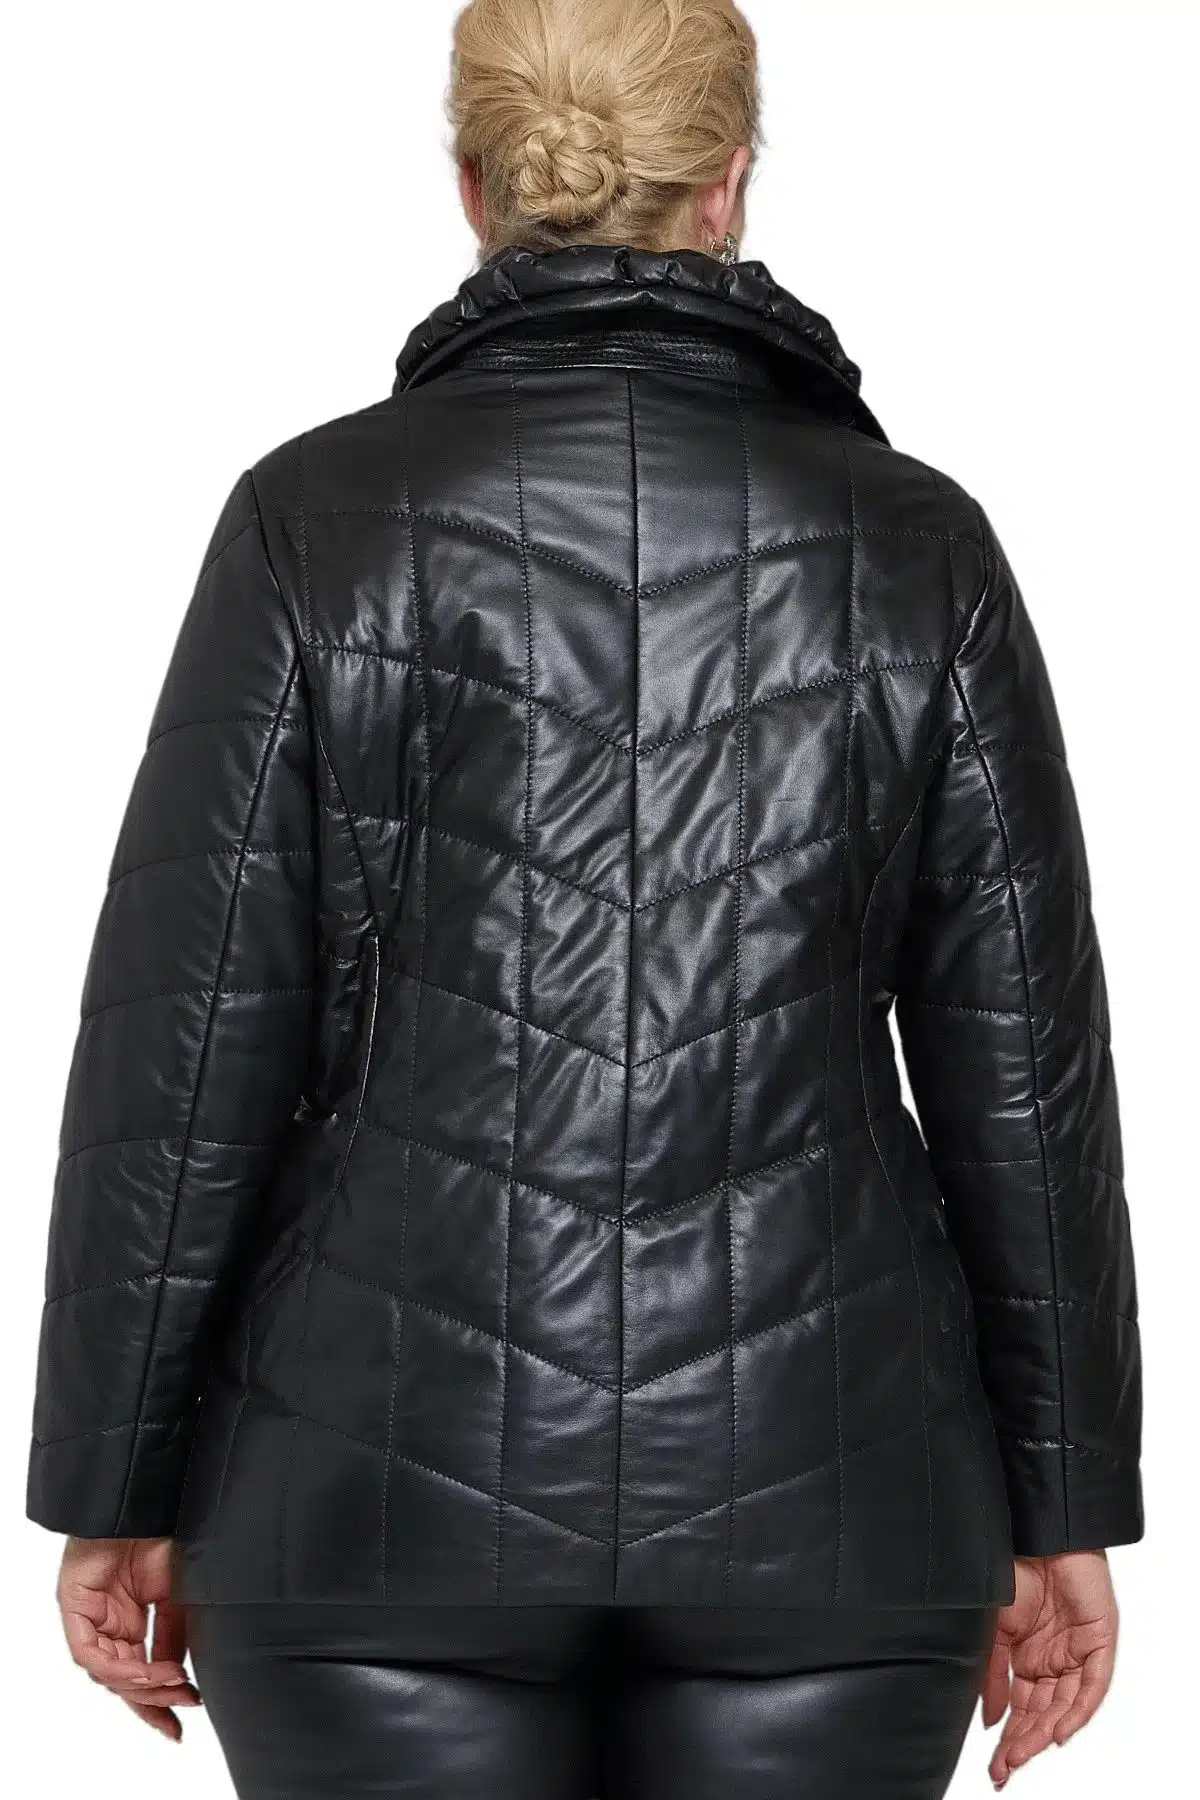 Stylish Women’s Leather Jacket in Black (2)_result